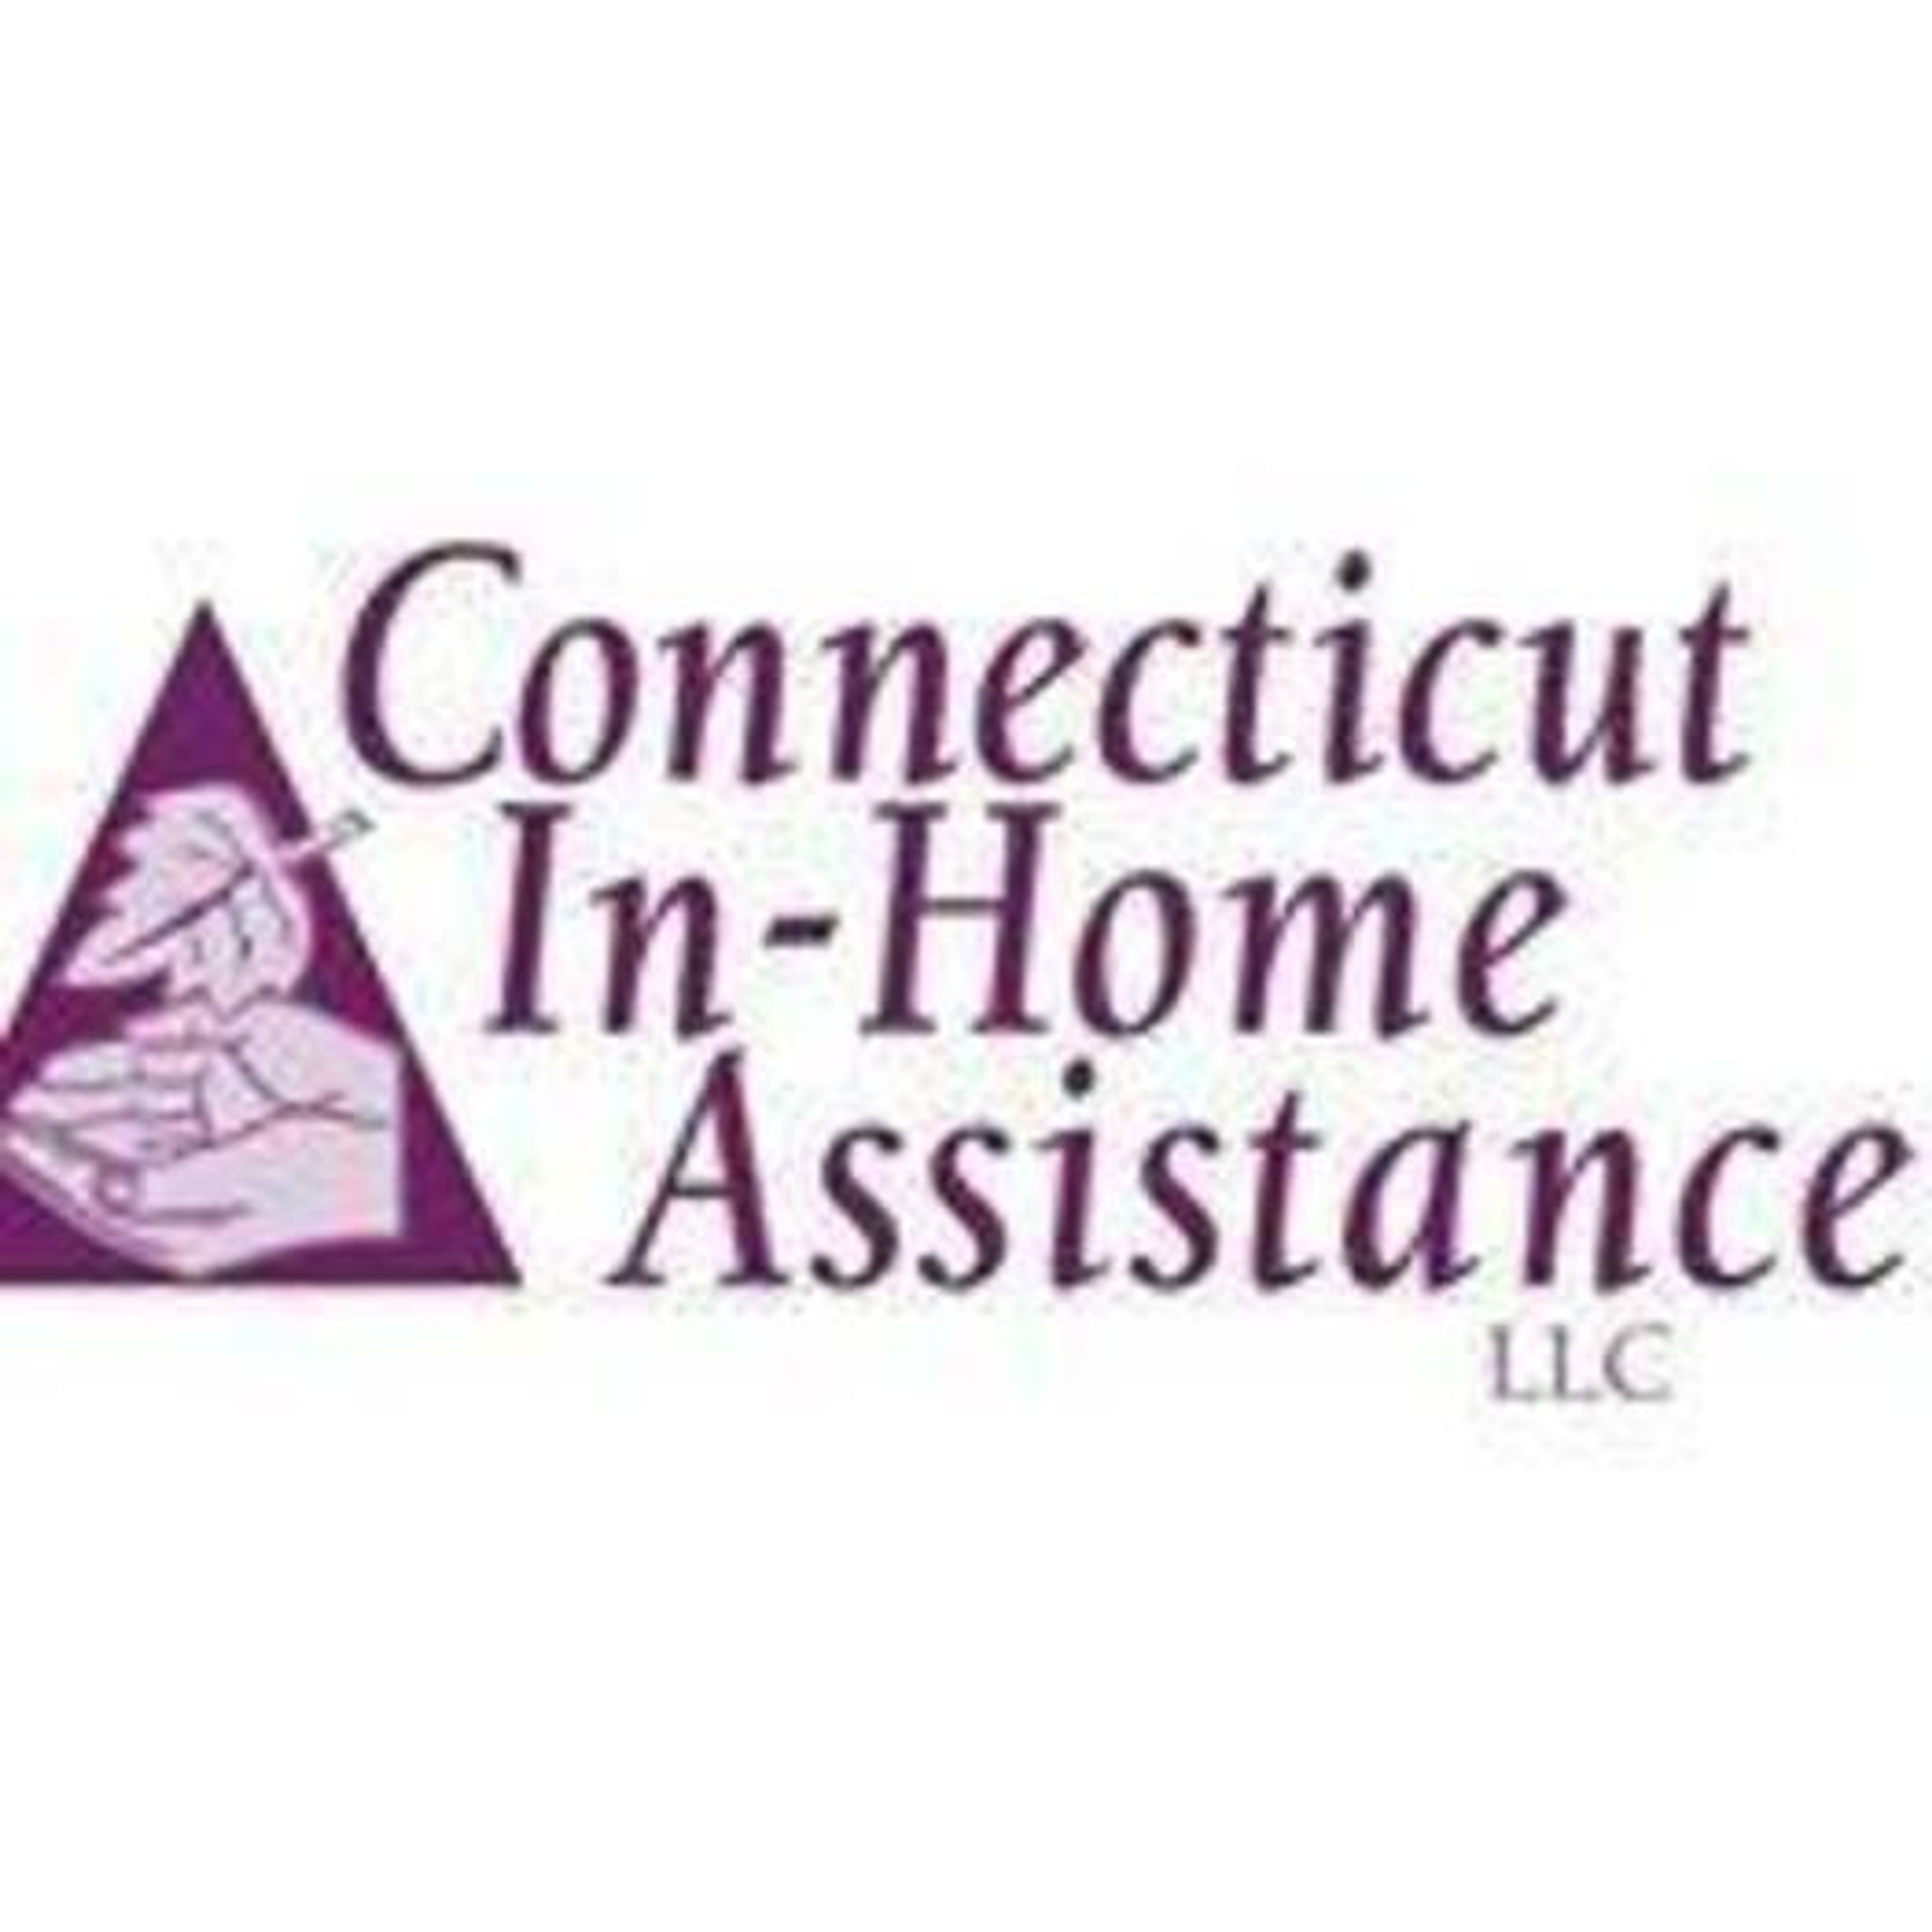 Connecticut In-Home Assistance LLC - Hartford